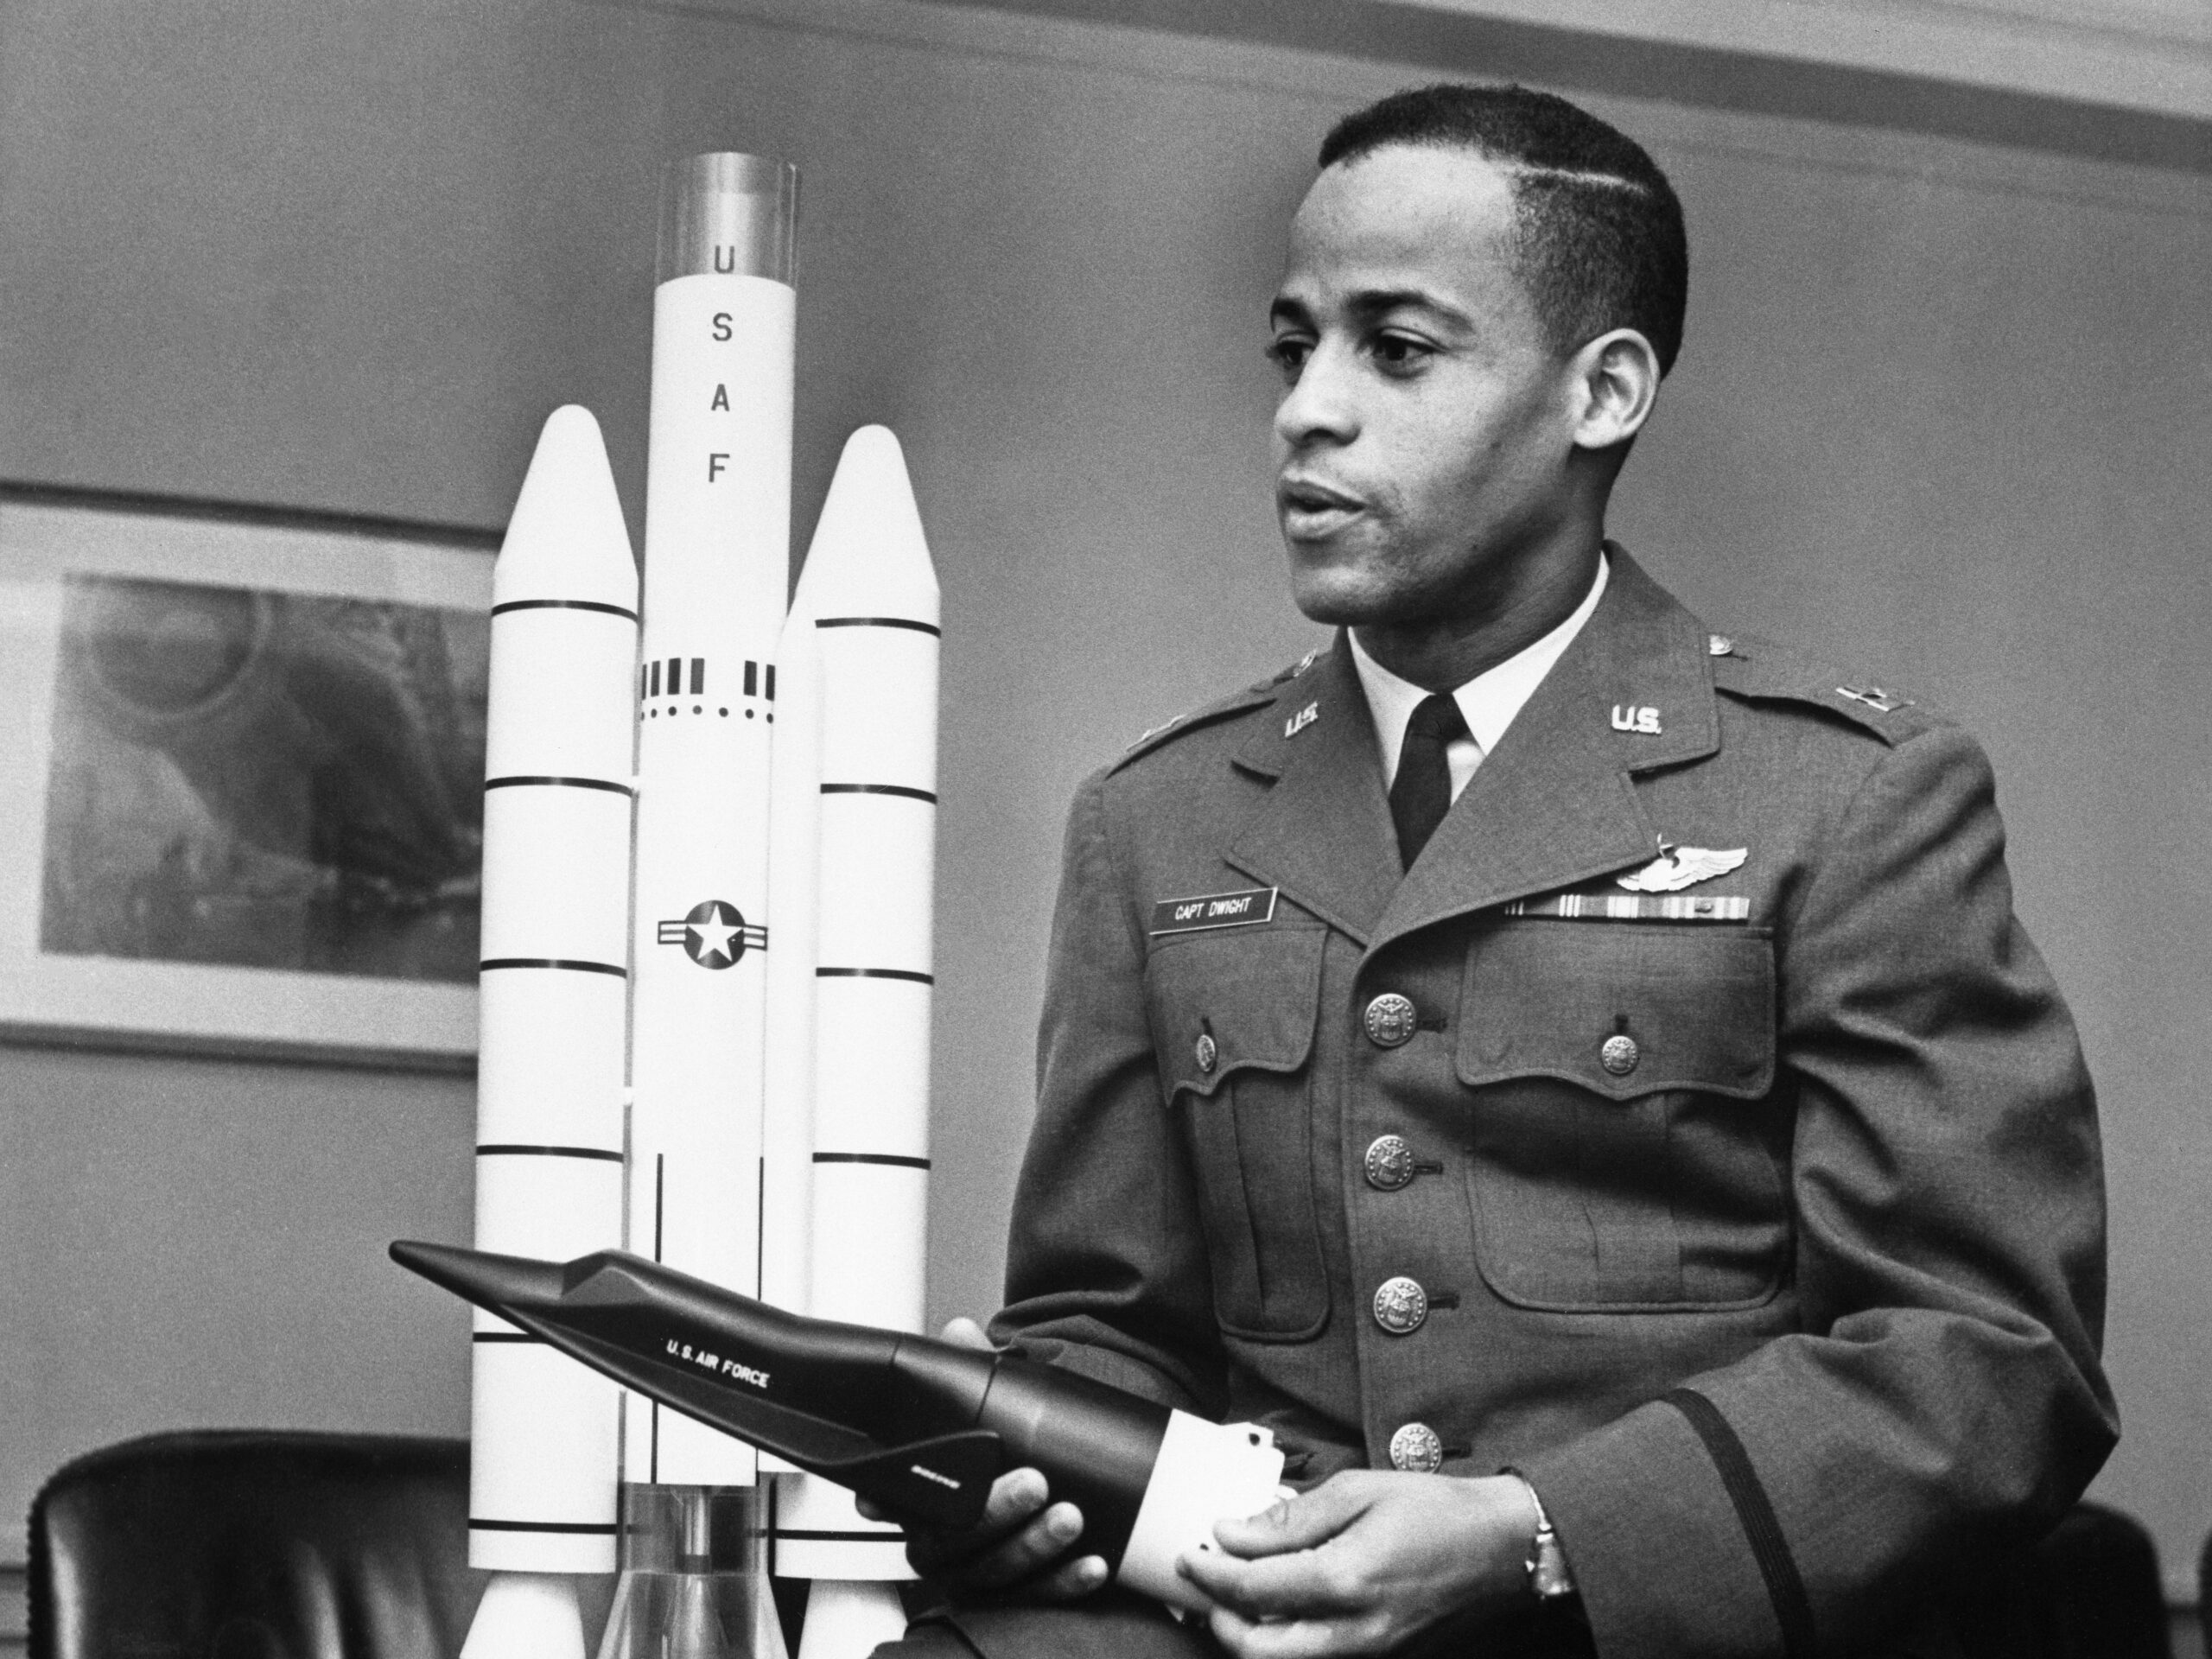 He missed a chance to be the first Black astronaut. Now, at 90, he’s going into space